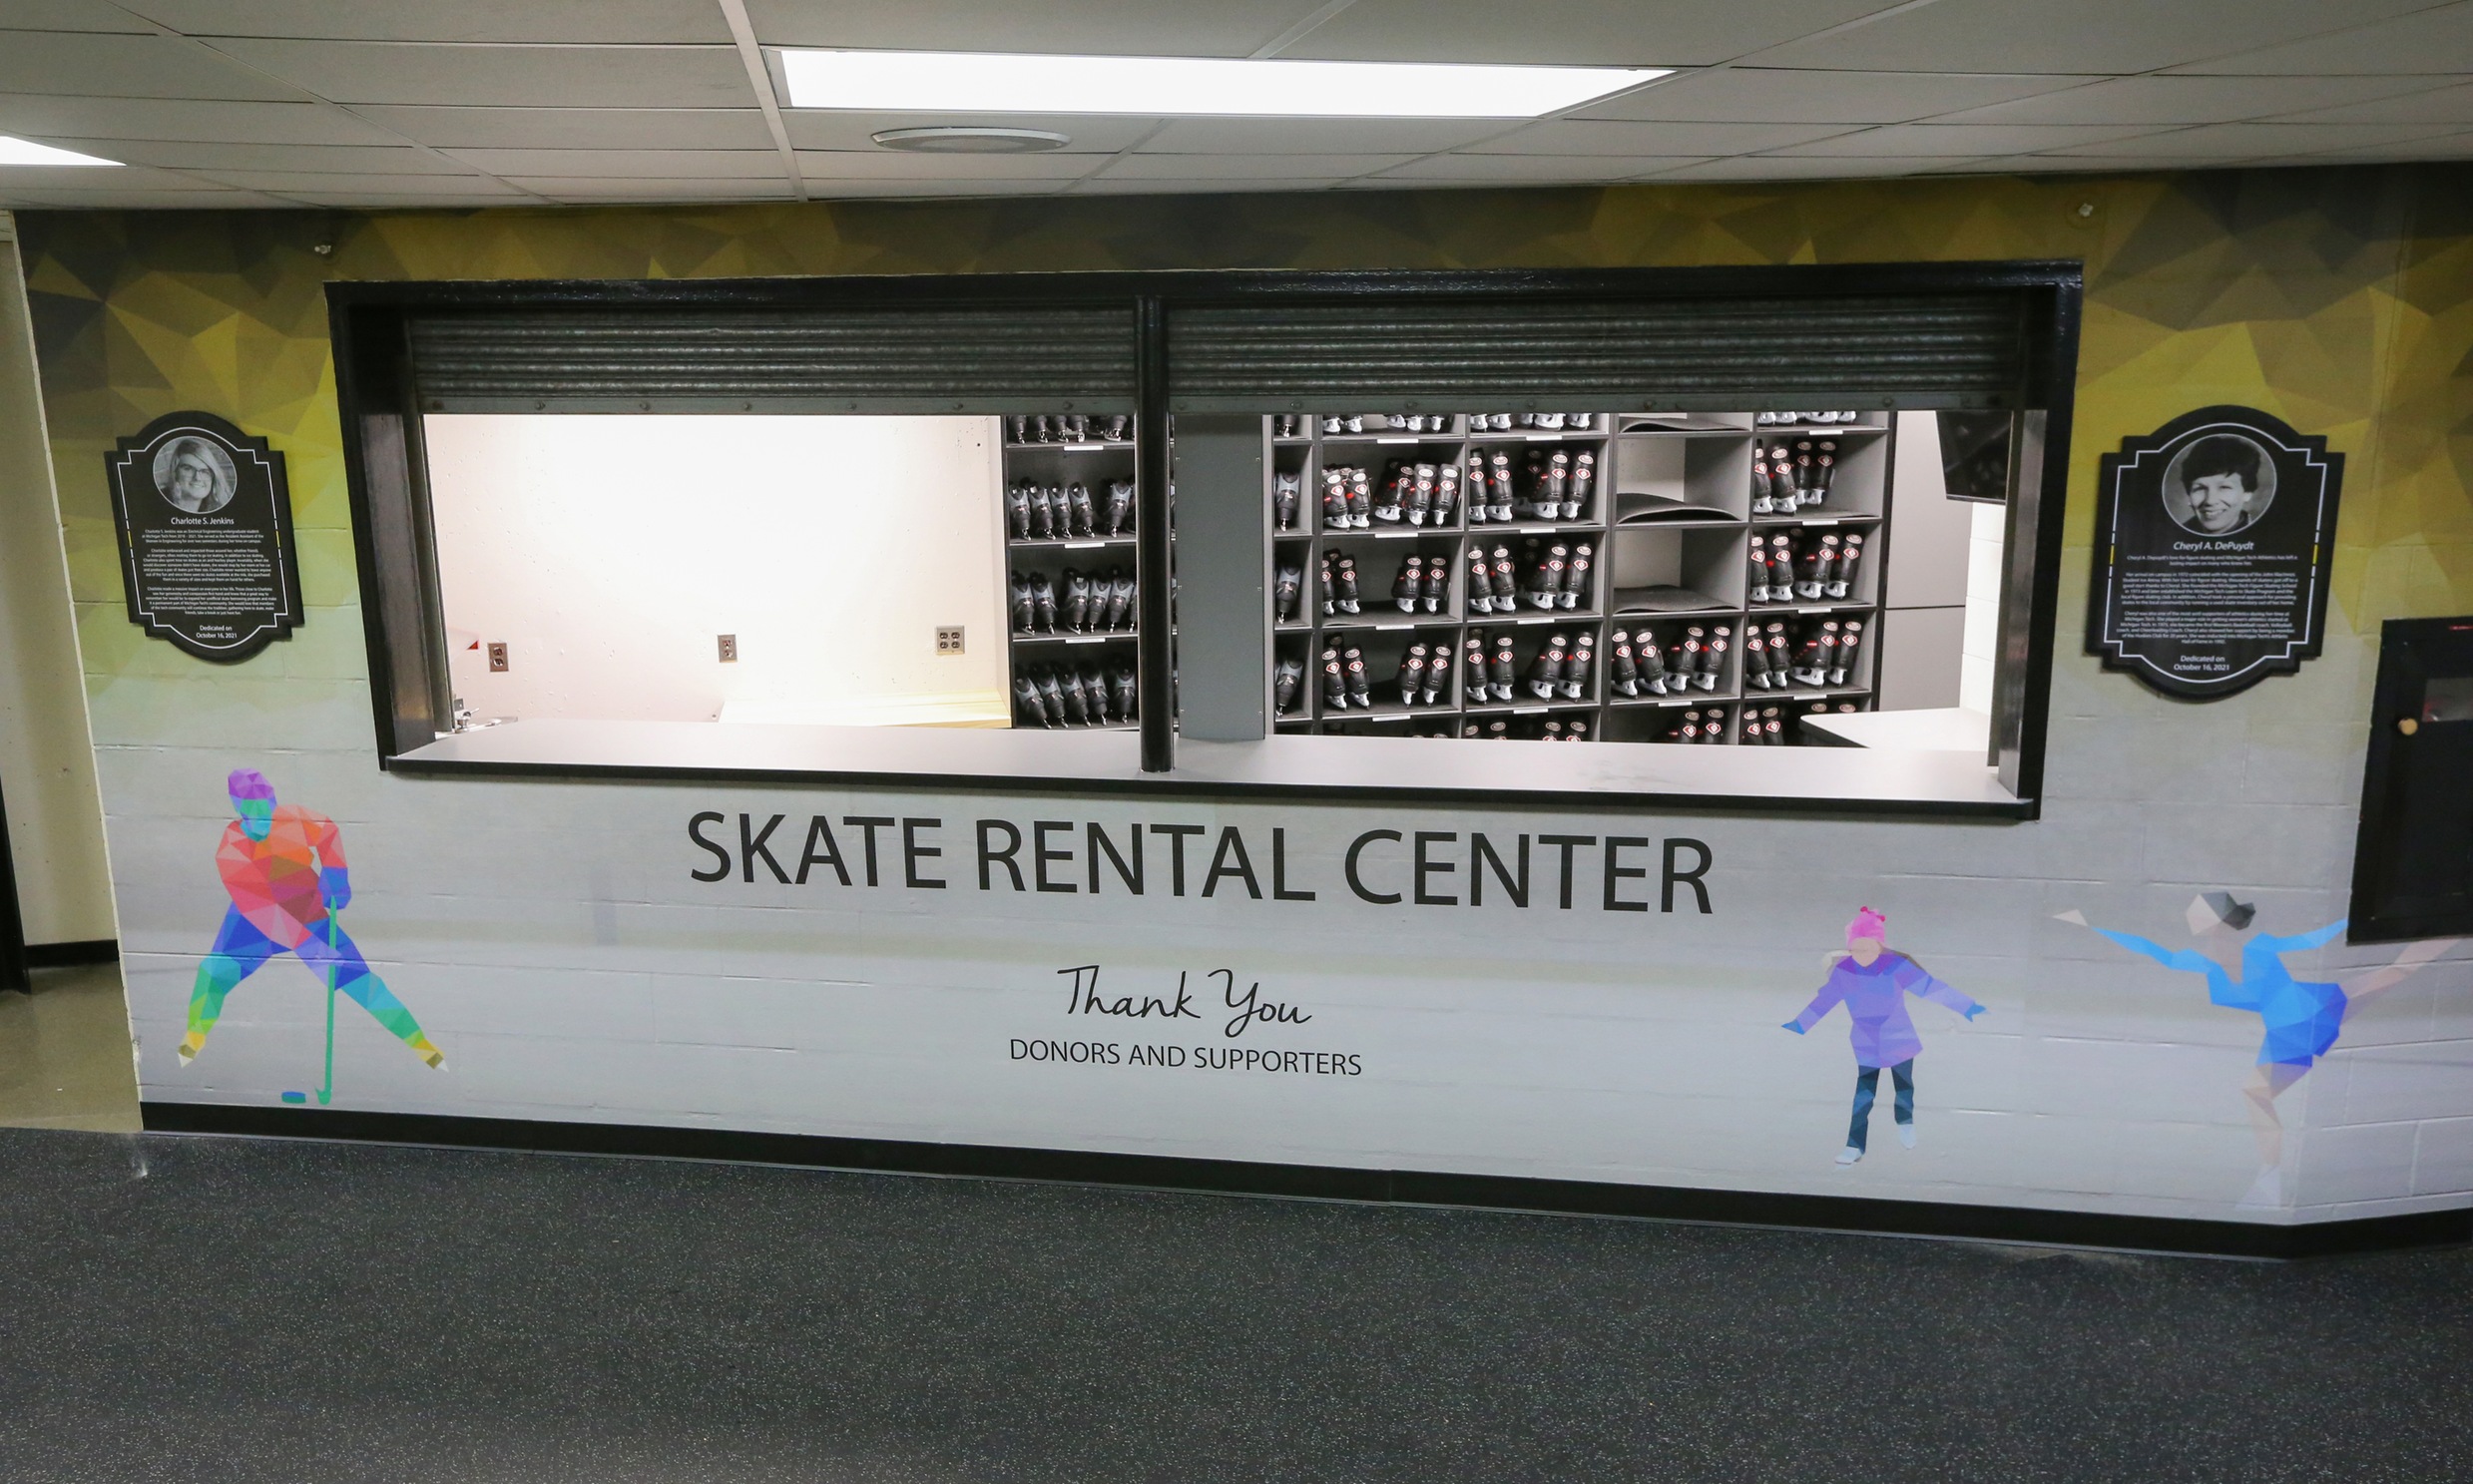 Skate Rental Center, located on the ice level of the John MacInnes Student Ice Arena